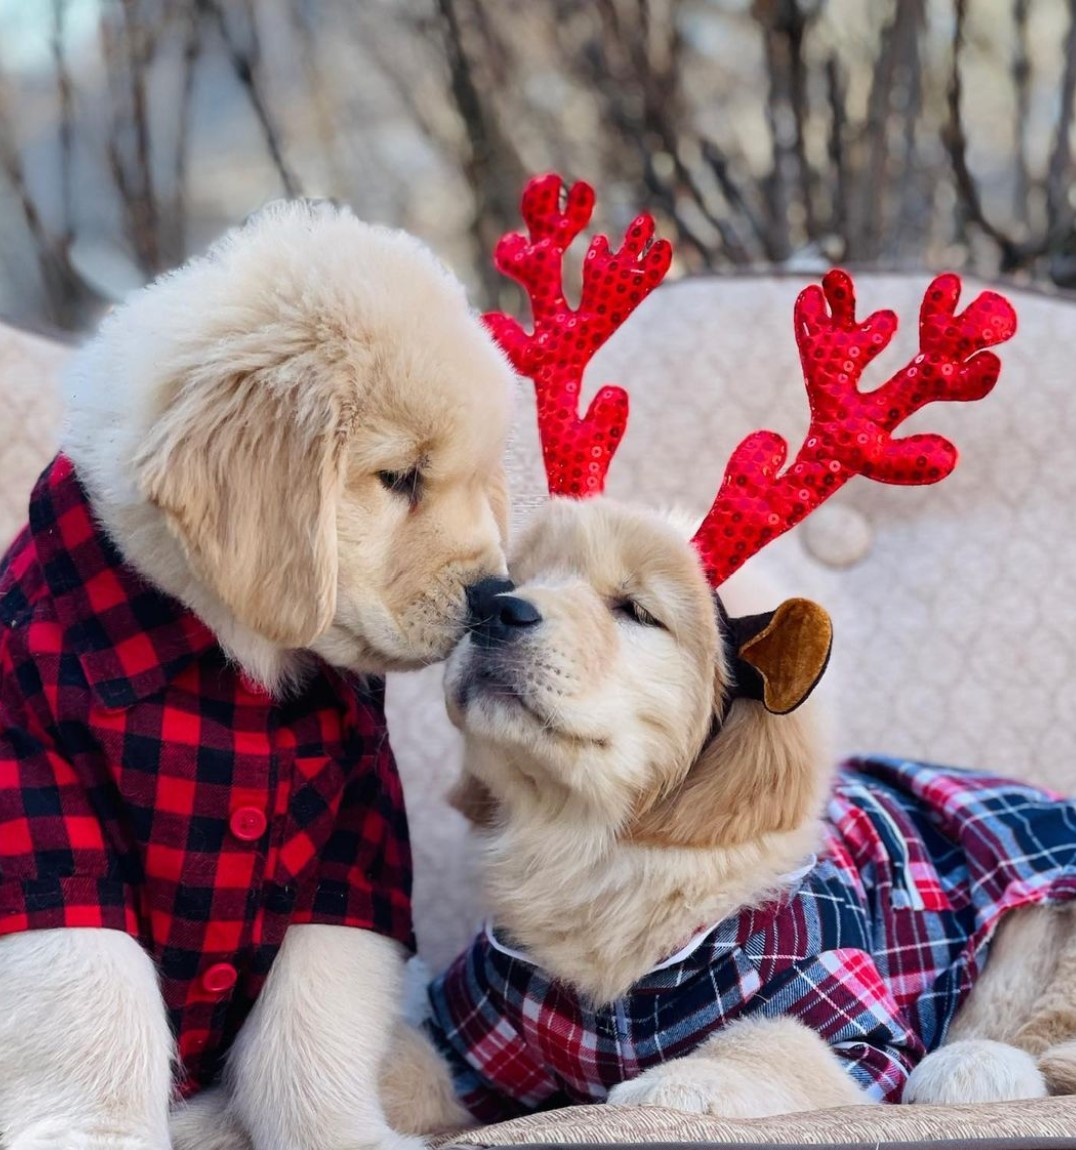 Good Morning from the Golden Retriever Channel.    The first Christmas 👇🎅boop will never be forgotten. Enjoy it puppers

#Dogs #Christmasathome #cutenessOVERLOAD 
(Golden.Mylokin IG)<- follow